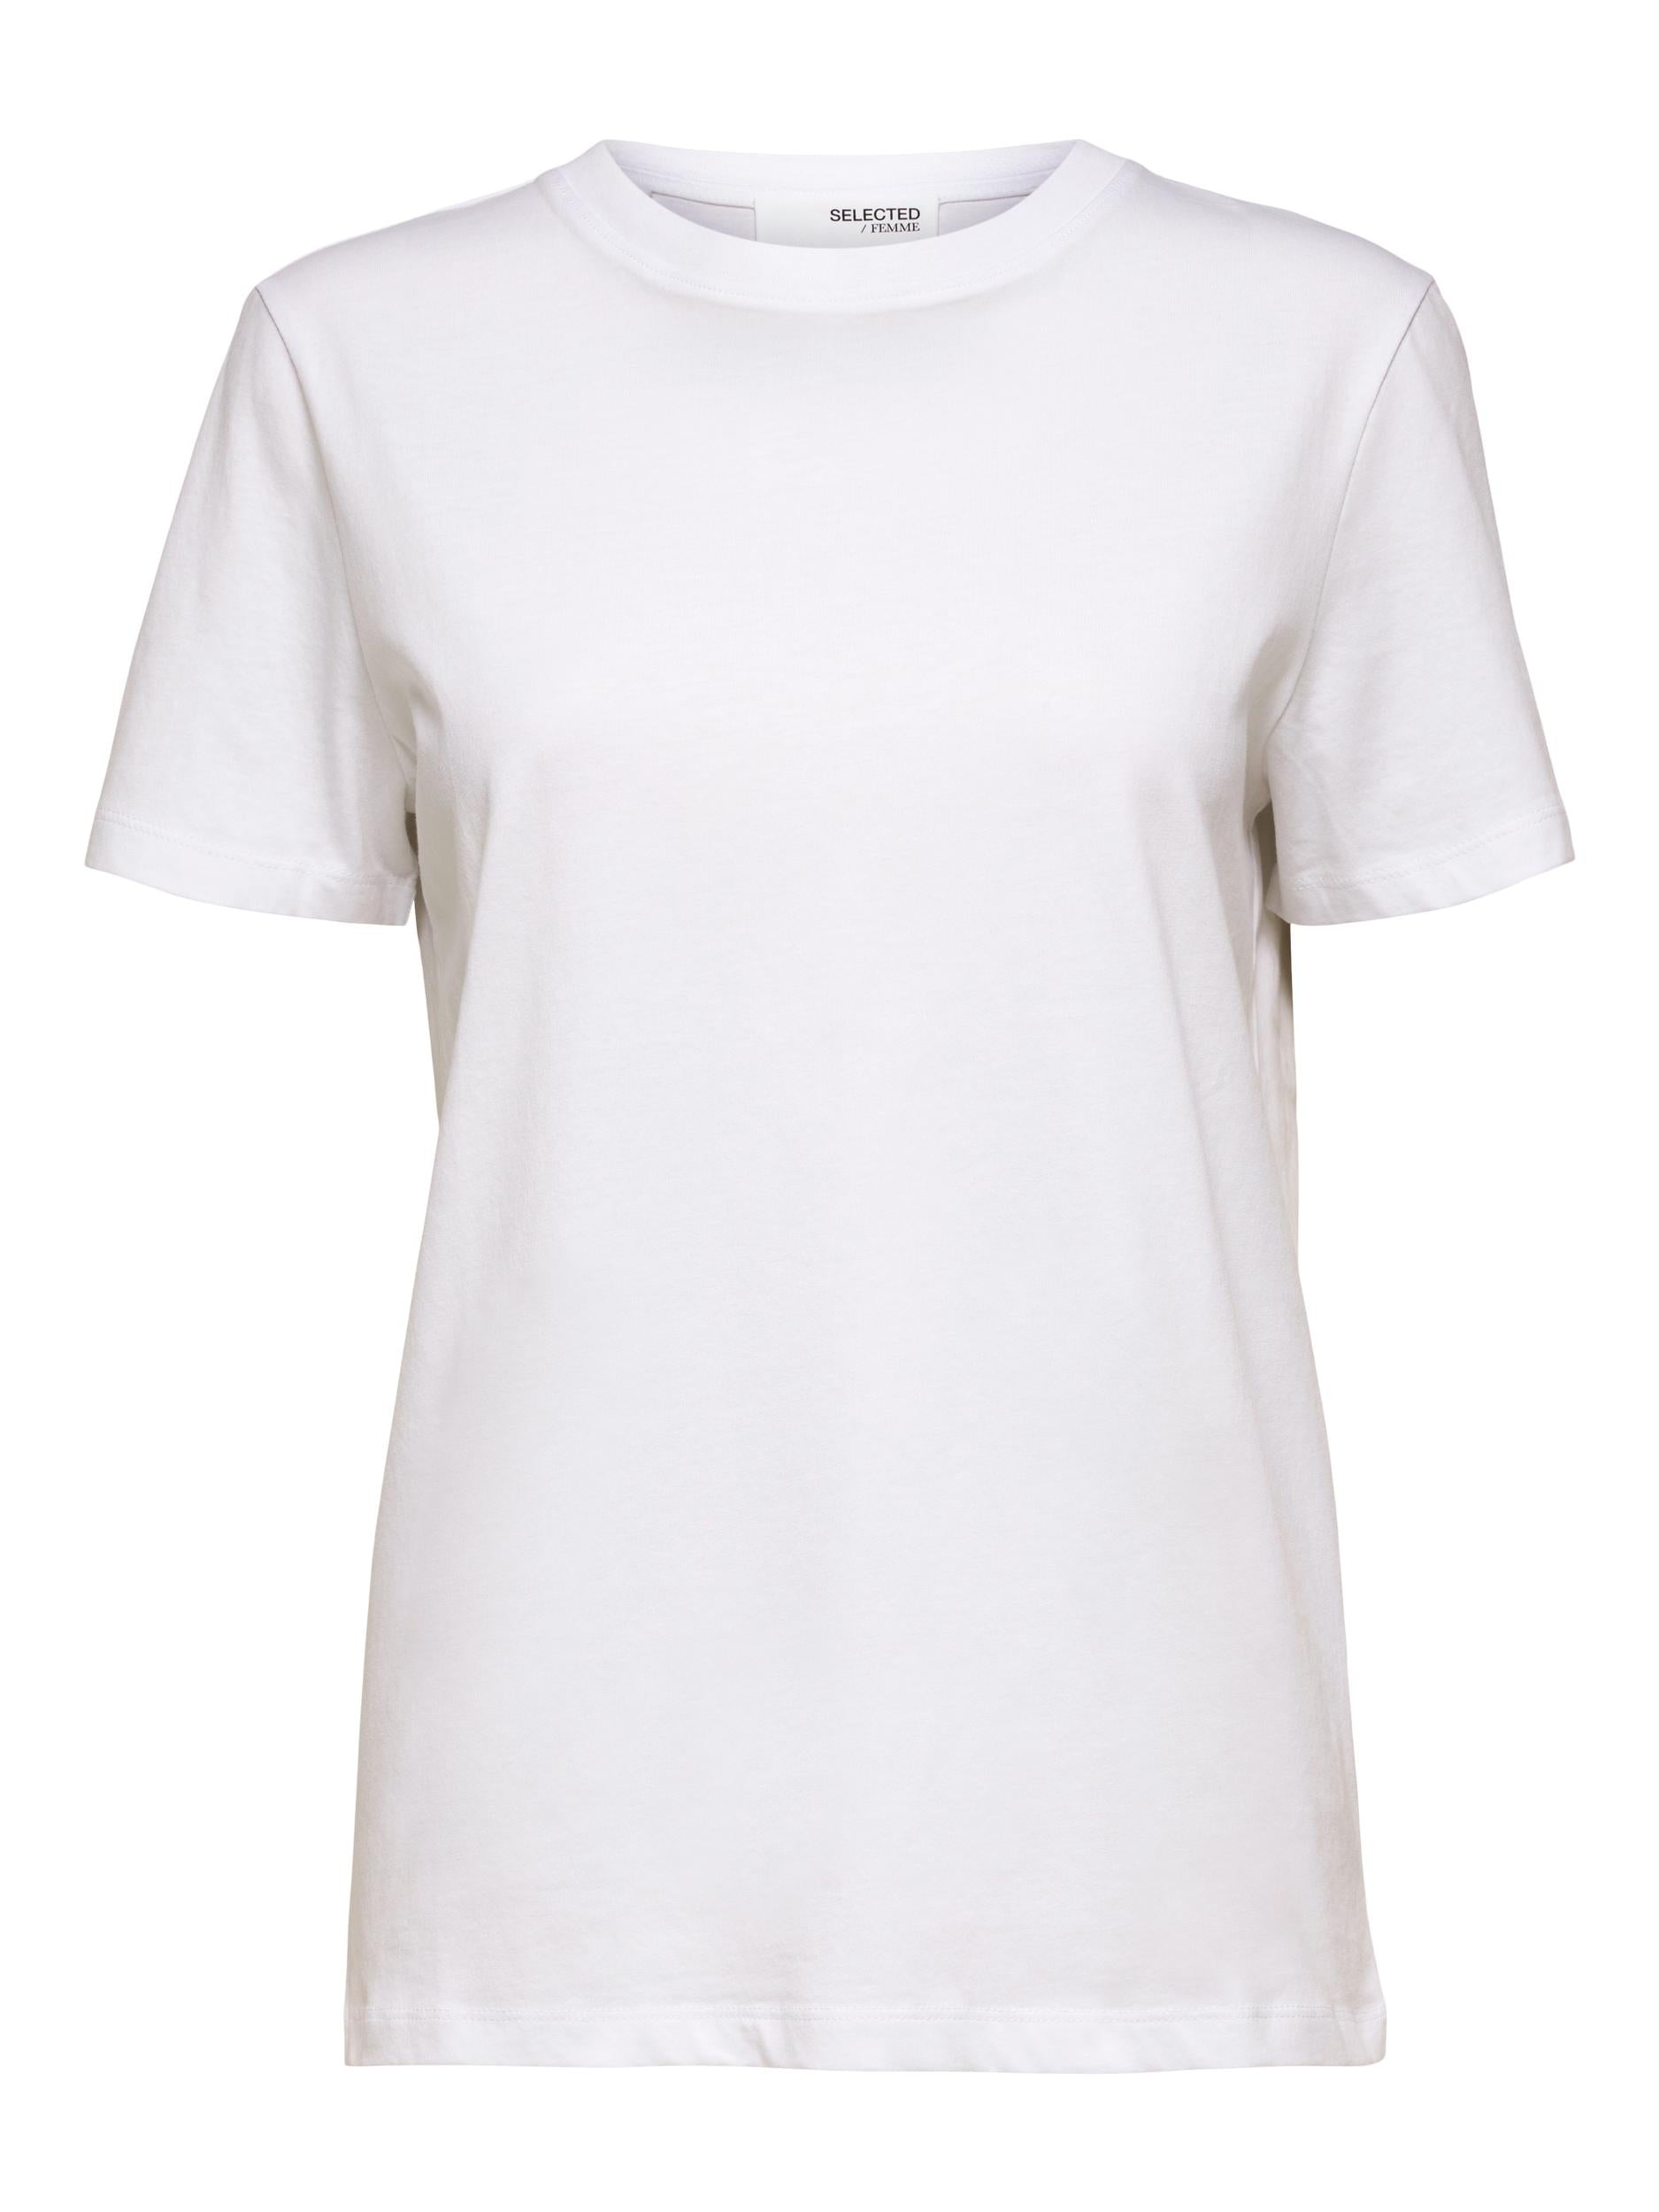 Selected Femme "MyEssential" O-Neck Tee